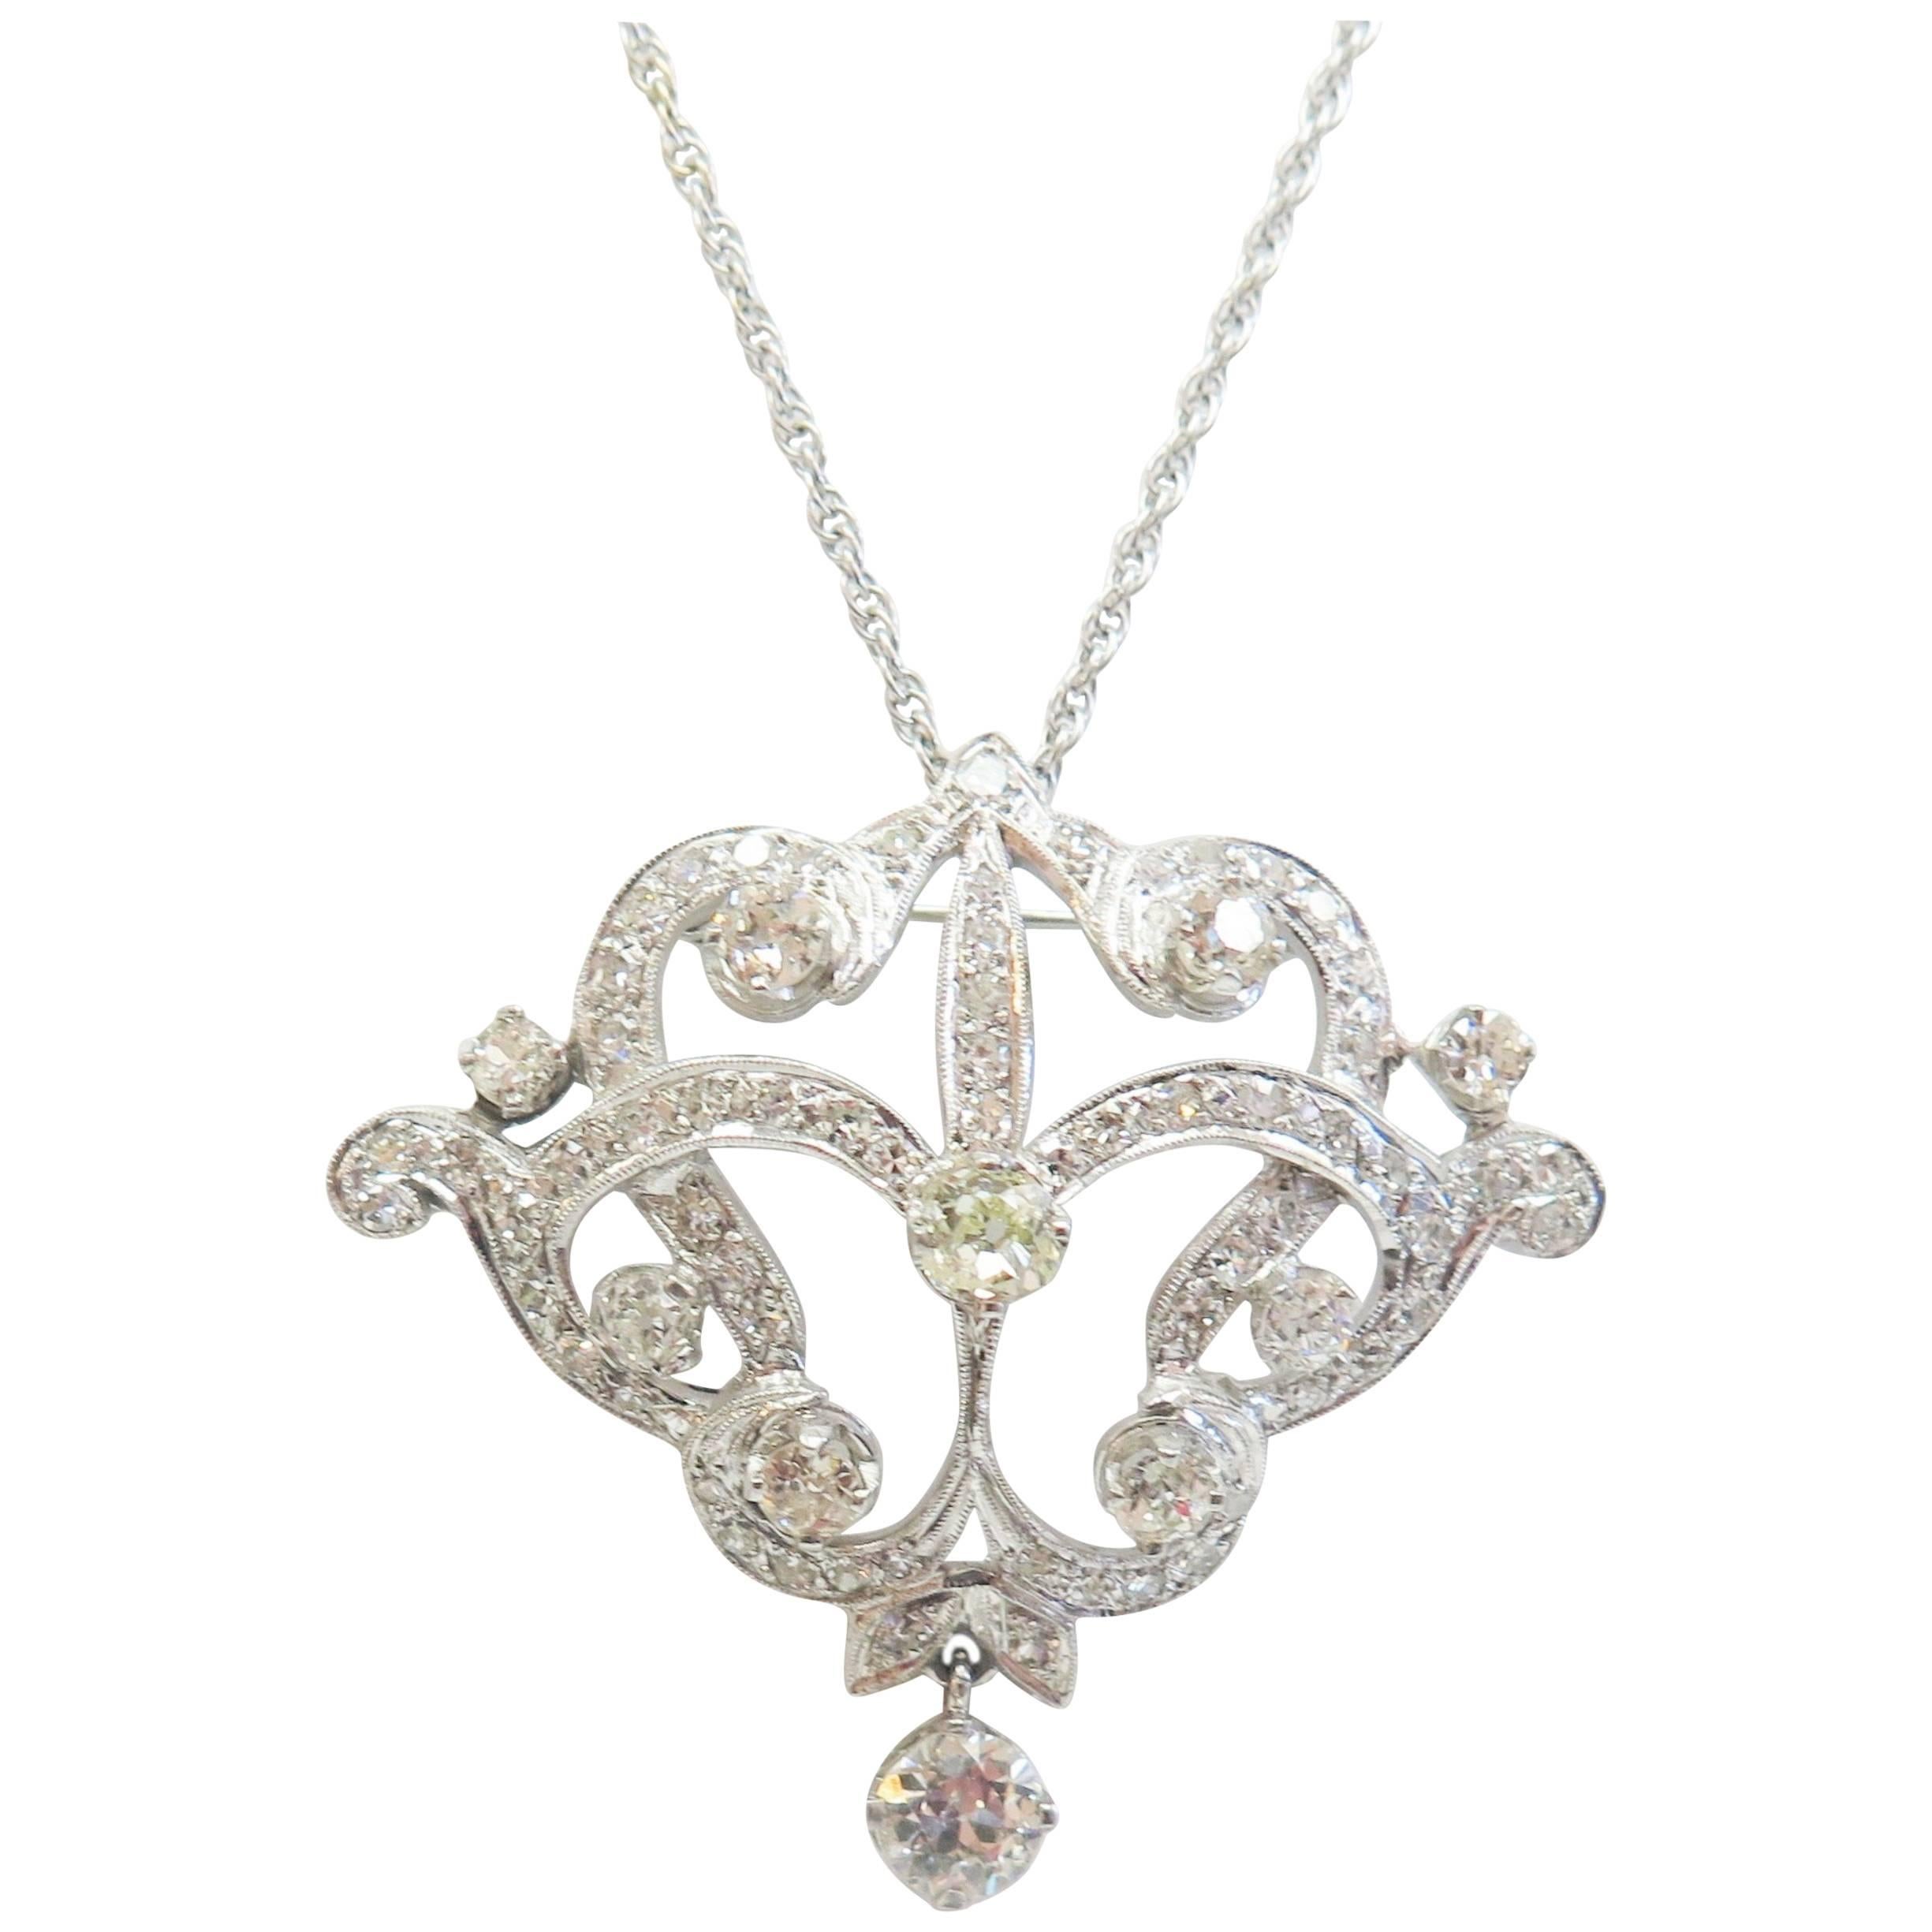 Dripping with sparkling with antique Diamonds, this pin/pendant has 3.67 Carats in Diamonds. A wonderful pendant from the Art Nouveau (circa 1920) era! 

There are 82 diamonds total.
Seven are Old European Cut, weights as follows:
2 approx. 0.11